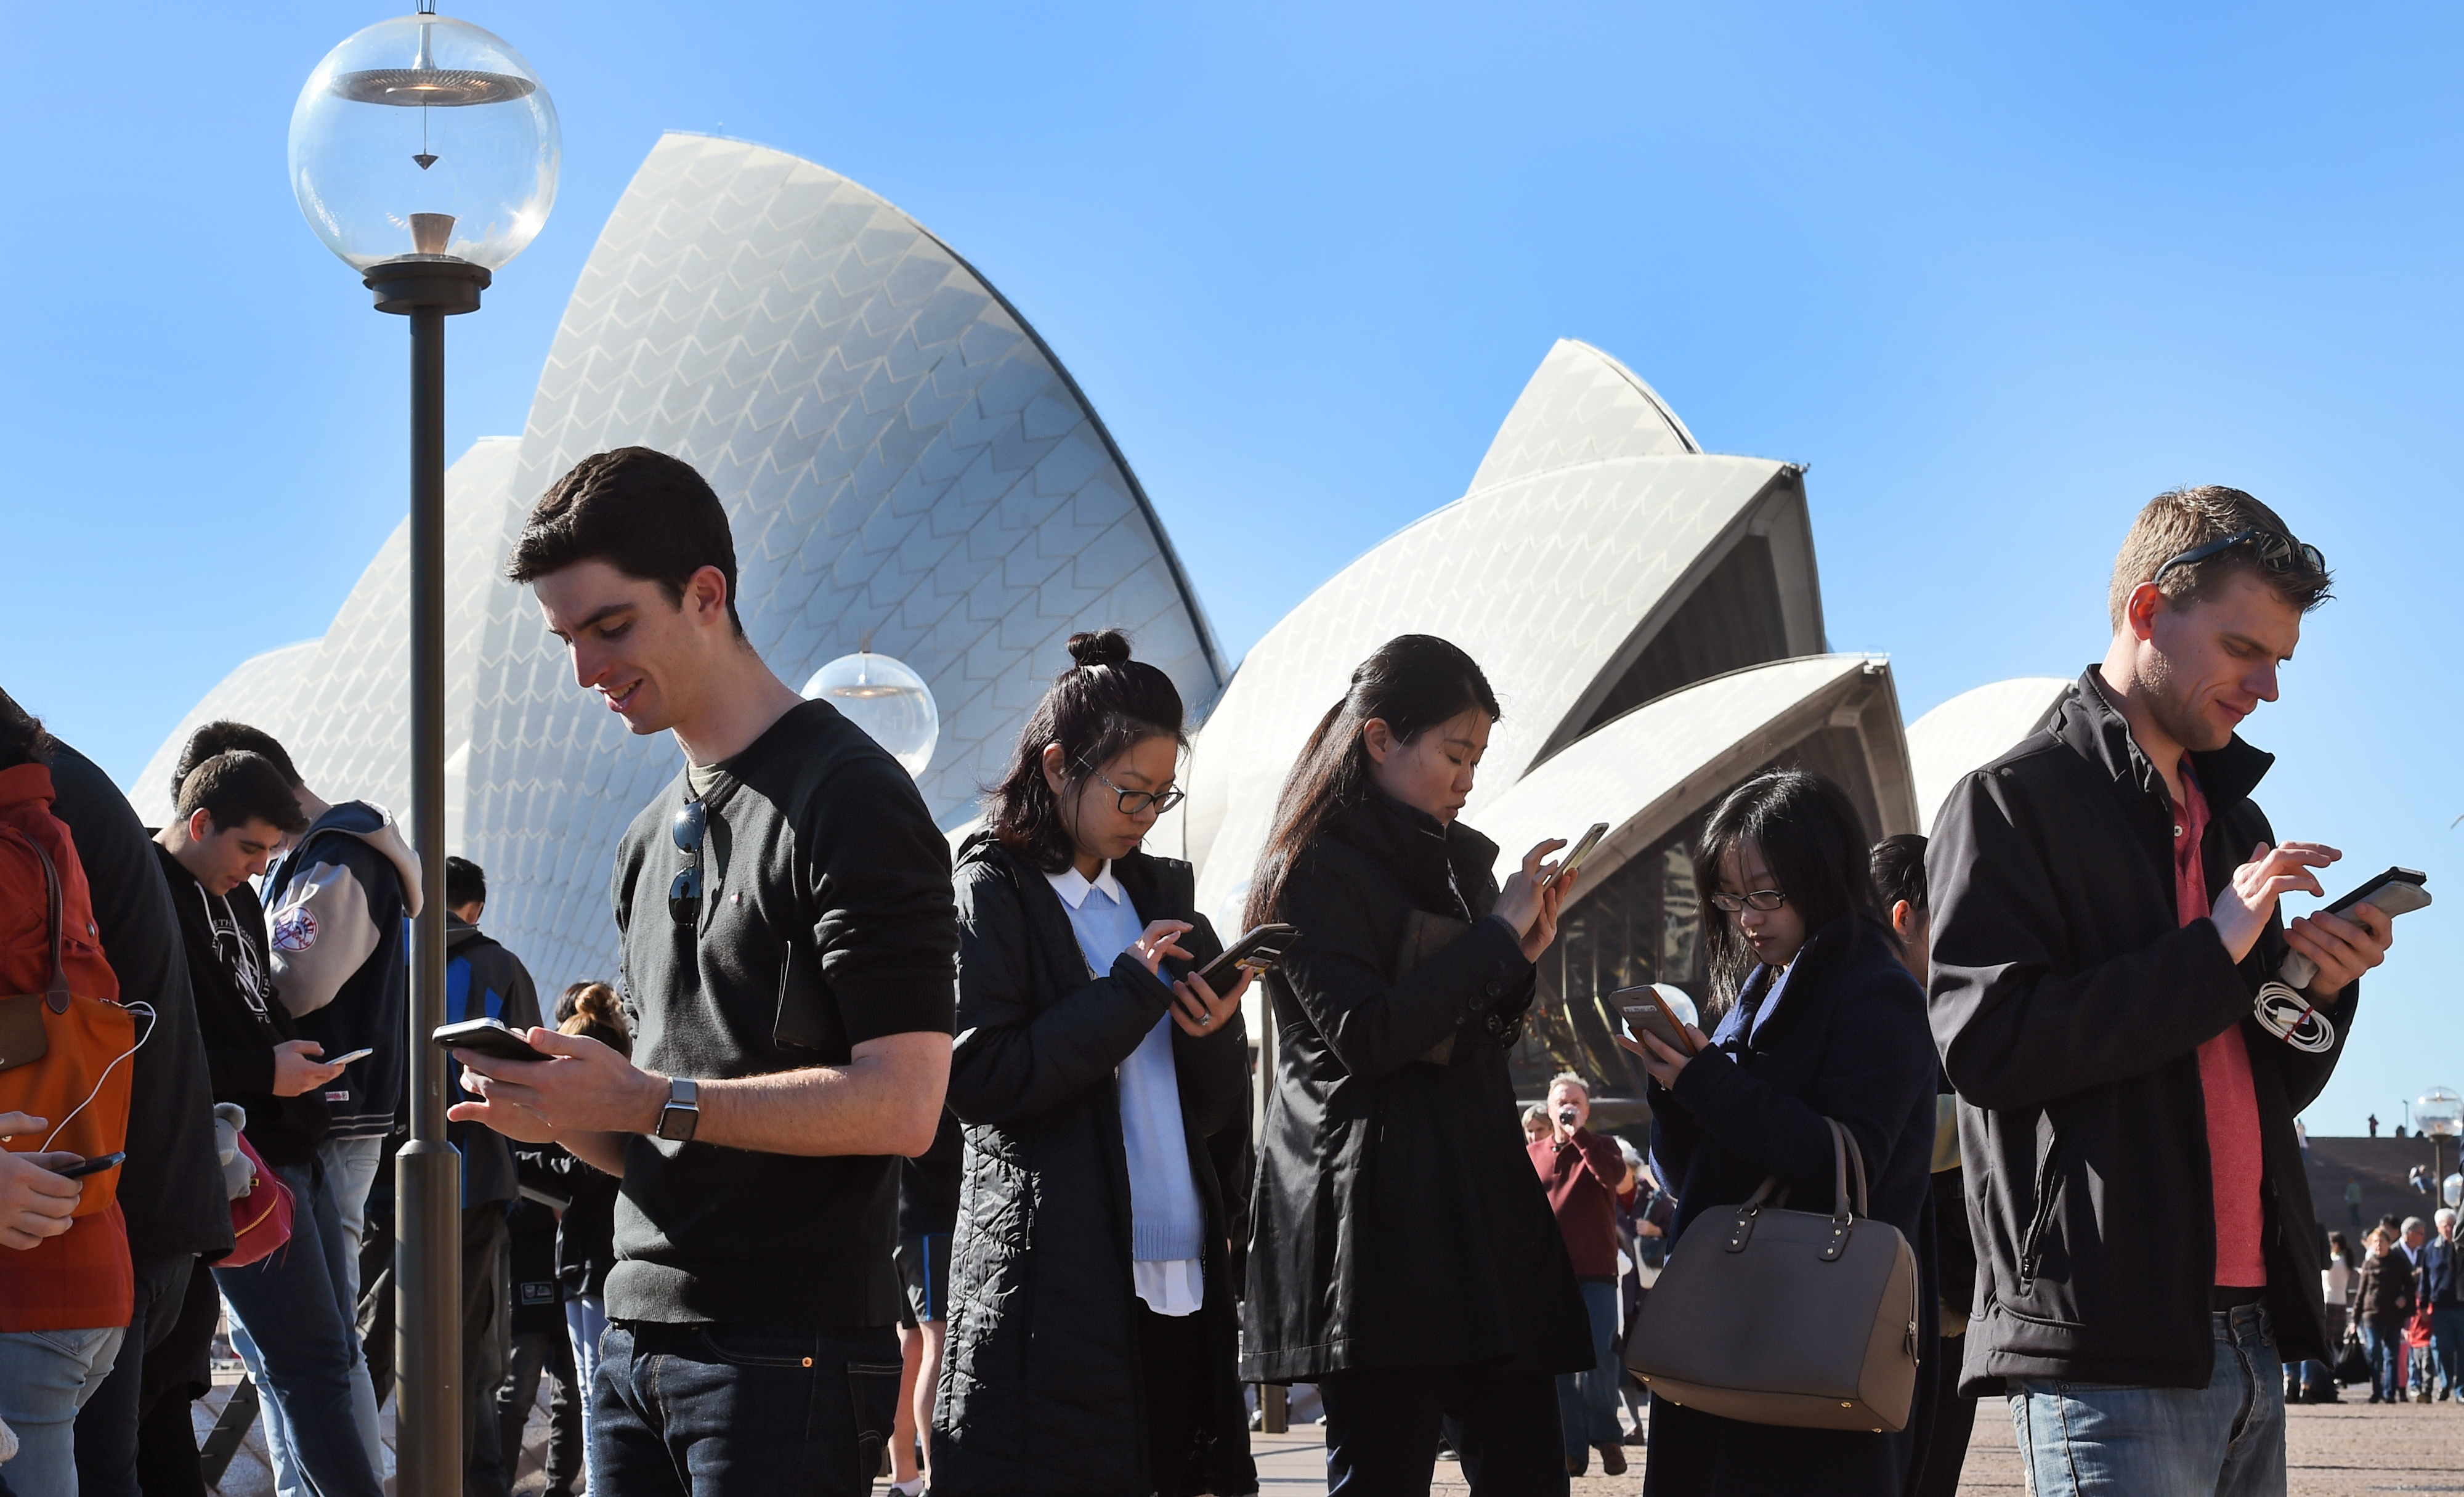 Dozens of people gather to play Pokemon Go in front of the Sydney Opera House on July 15, 2016. The wildly popular mobile app, which is based on a 1990s Nintendo game, has created a global frenzy as players roam the real world looking for cartoon monsters and was launched in Australia last week. / AFP PHOTO / William WEST